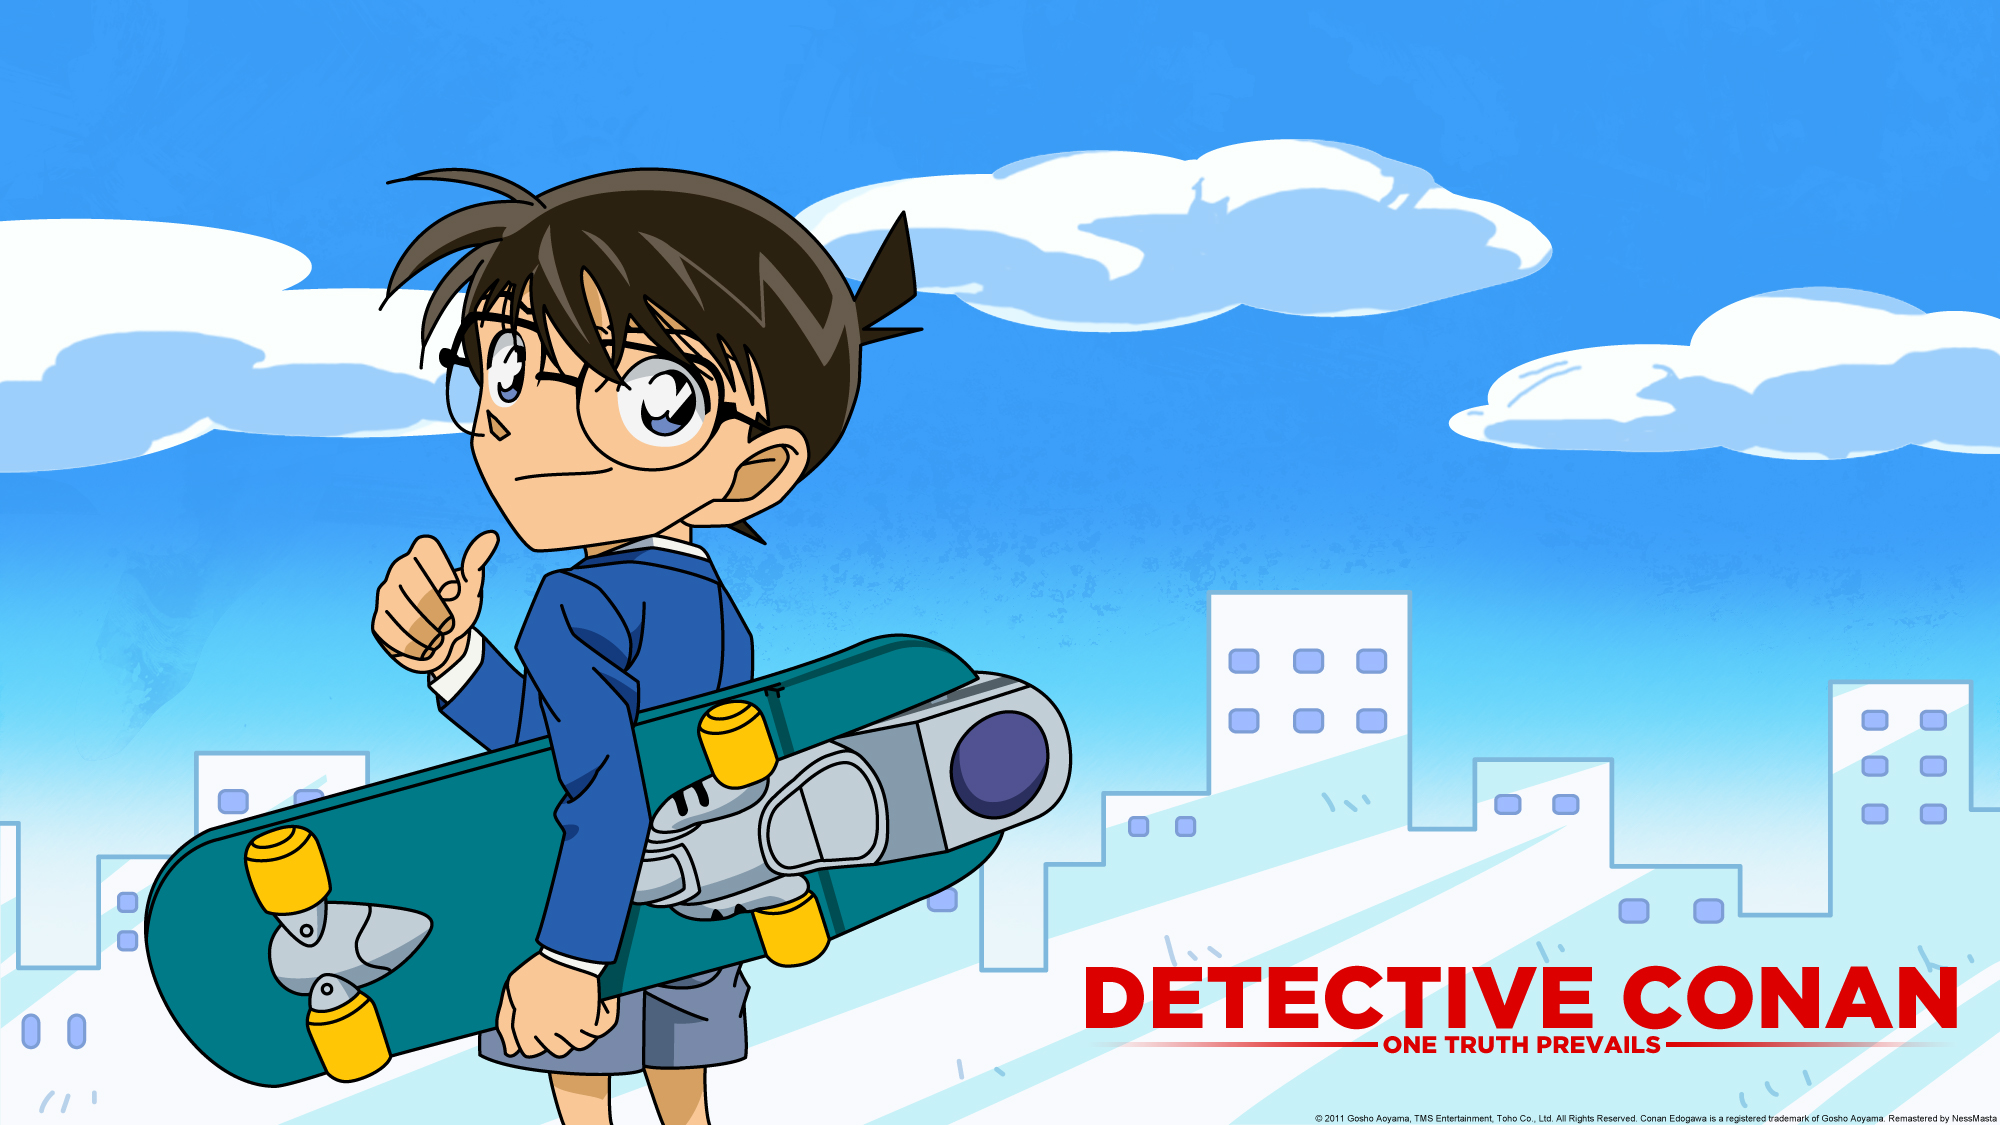  series detective conan you can read detective conan here i will not